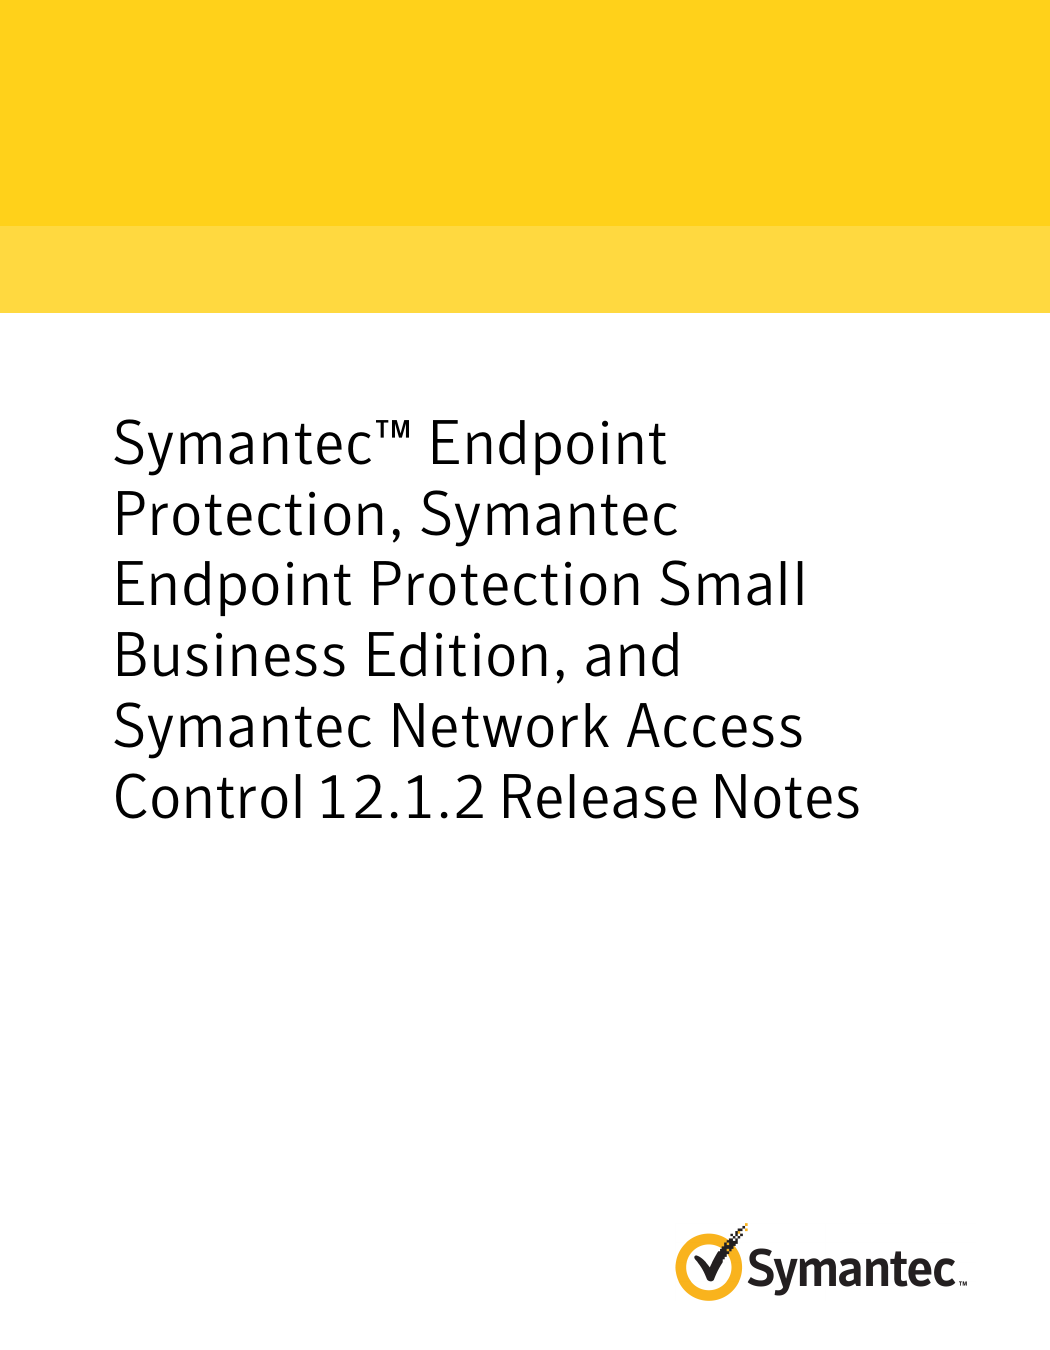 Symantec Endpoint Protection 14.3.10148.8000 downloading